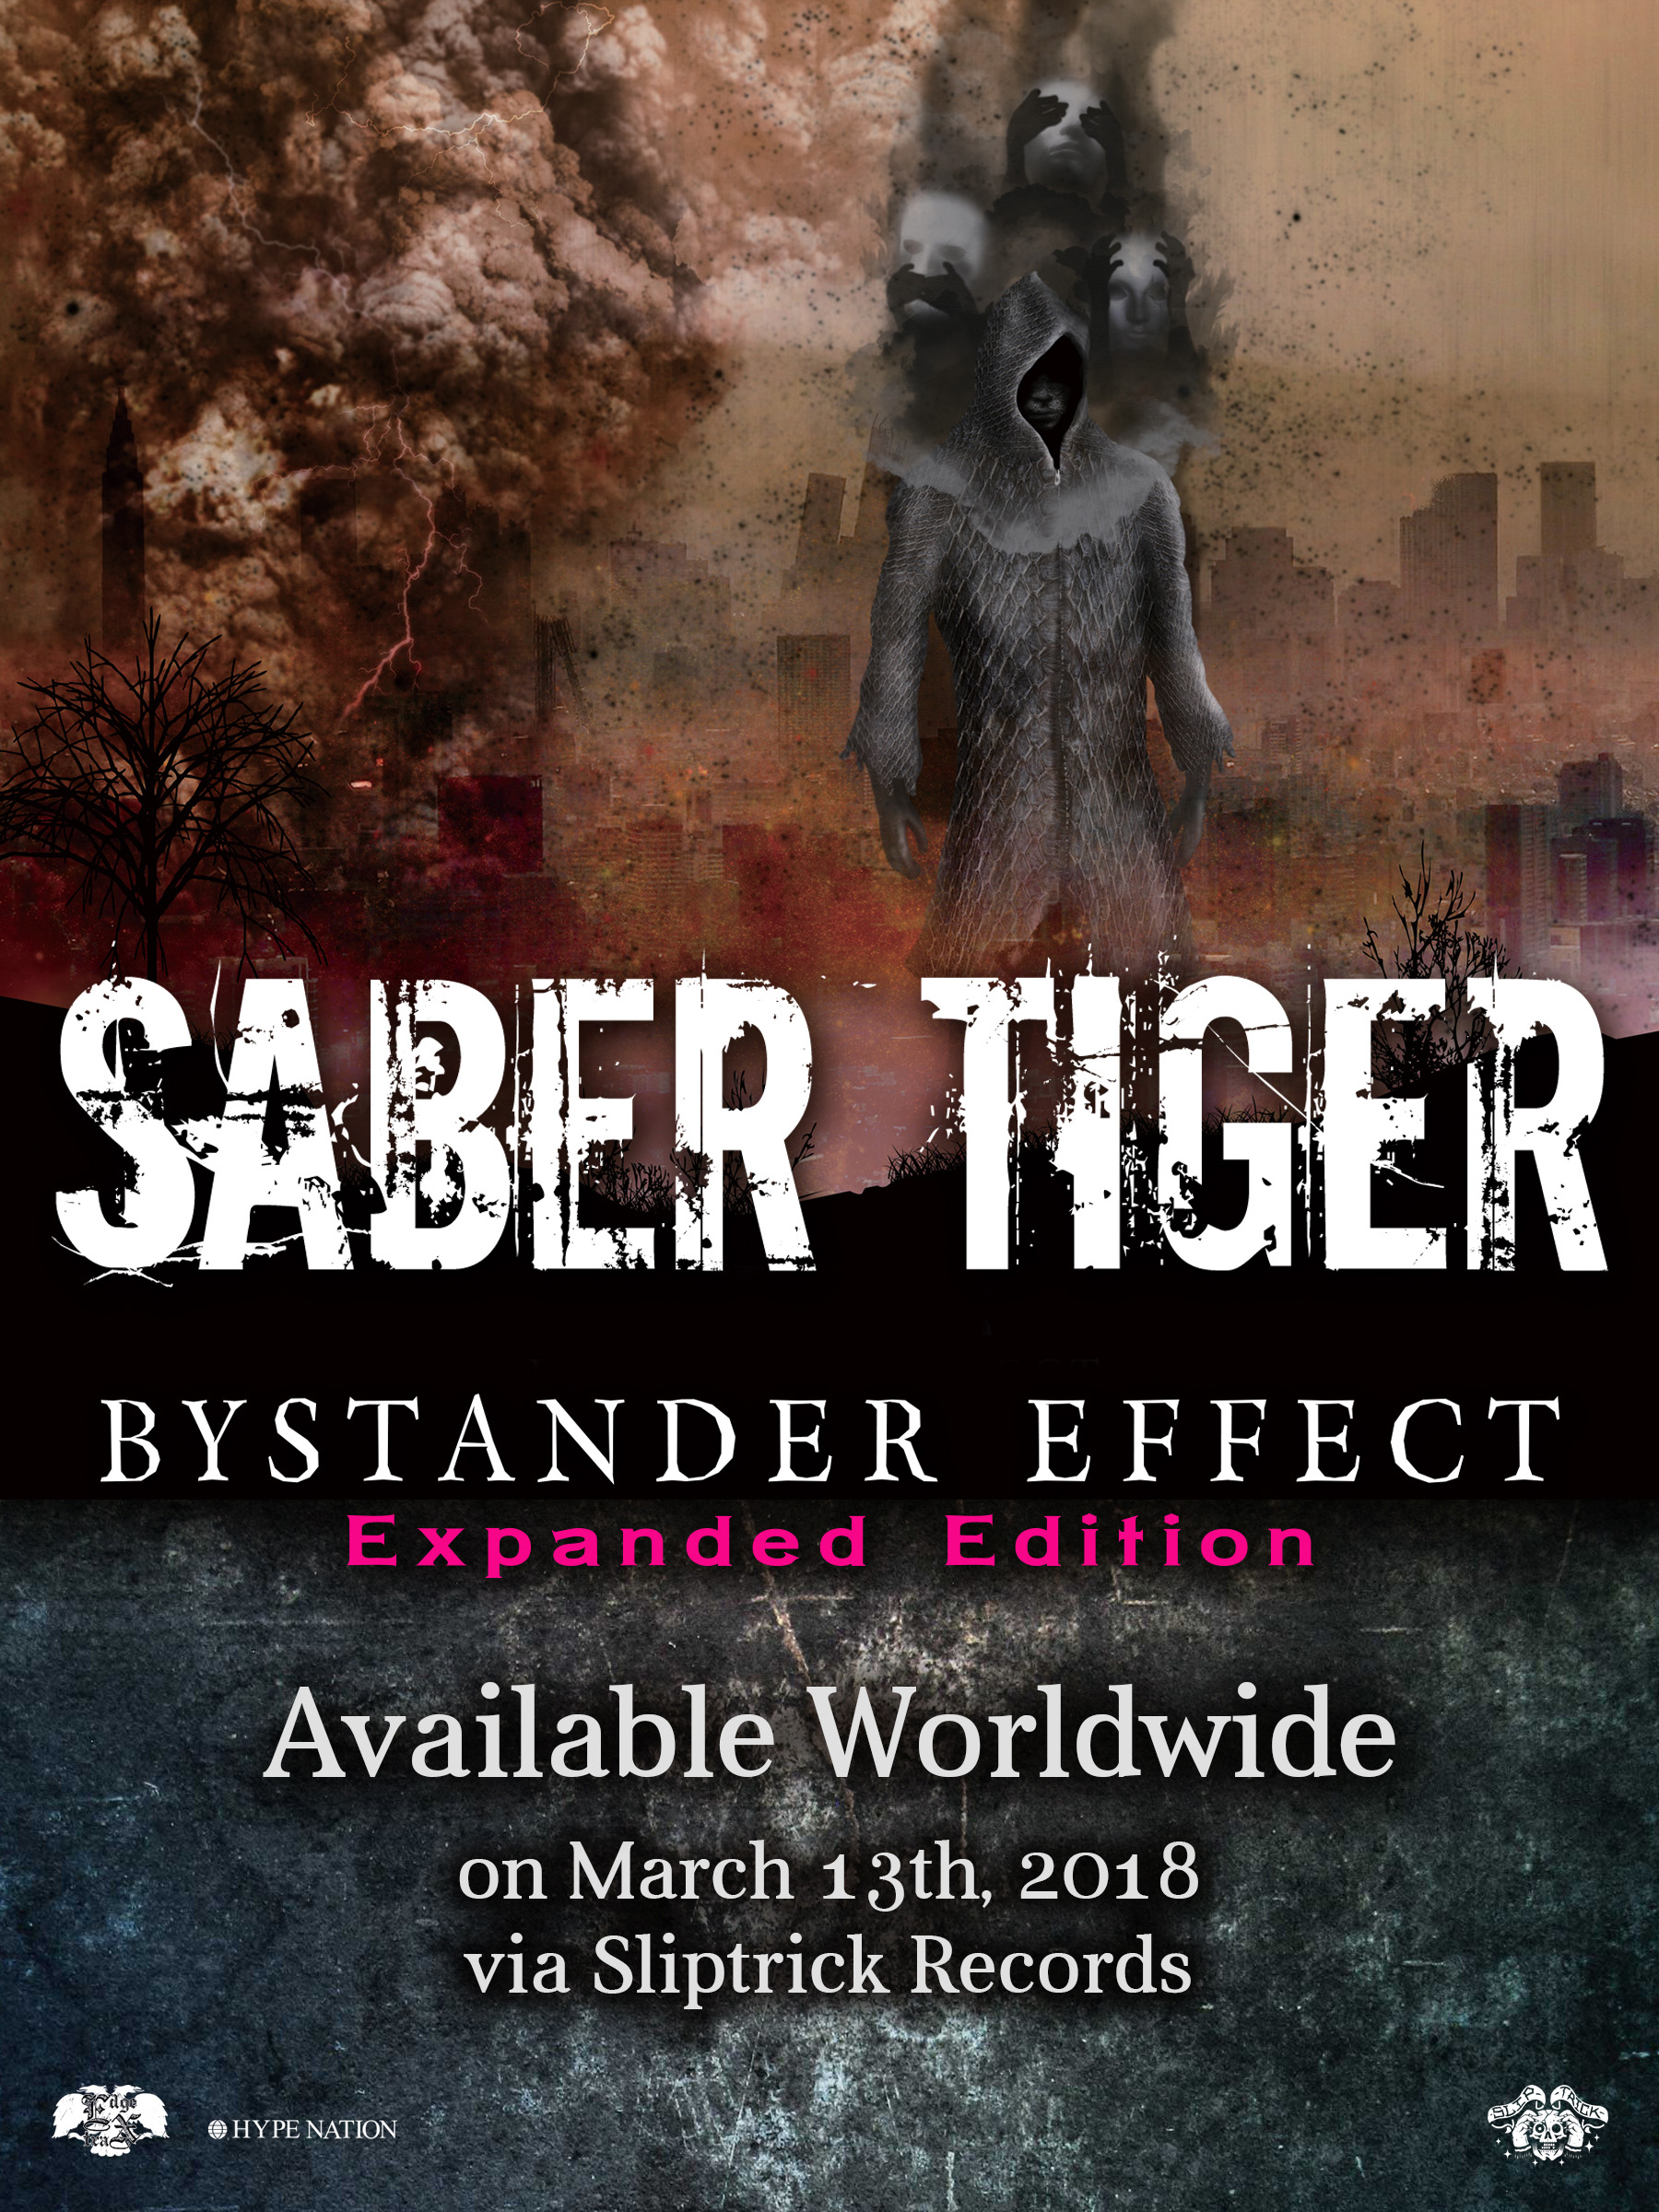 BYSTANDER EFFECT [Expanded Edition]